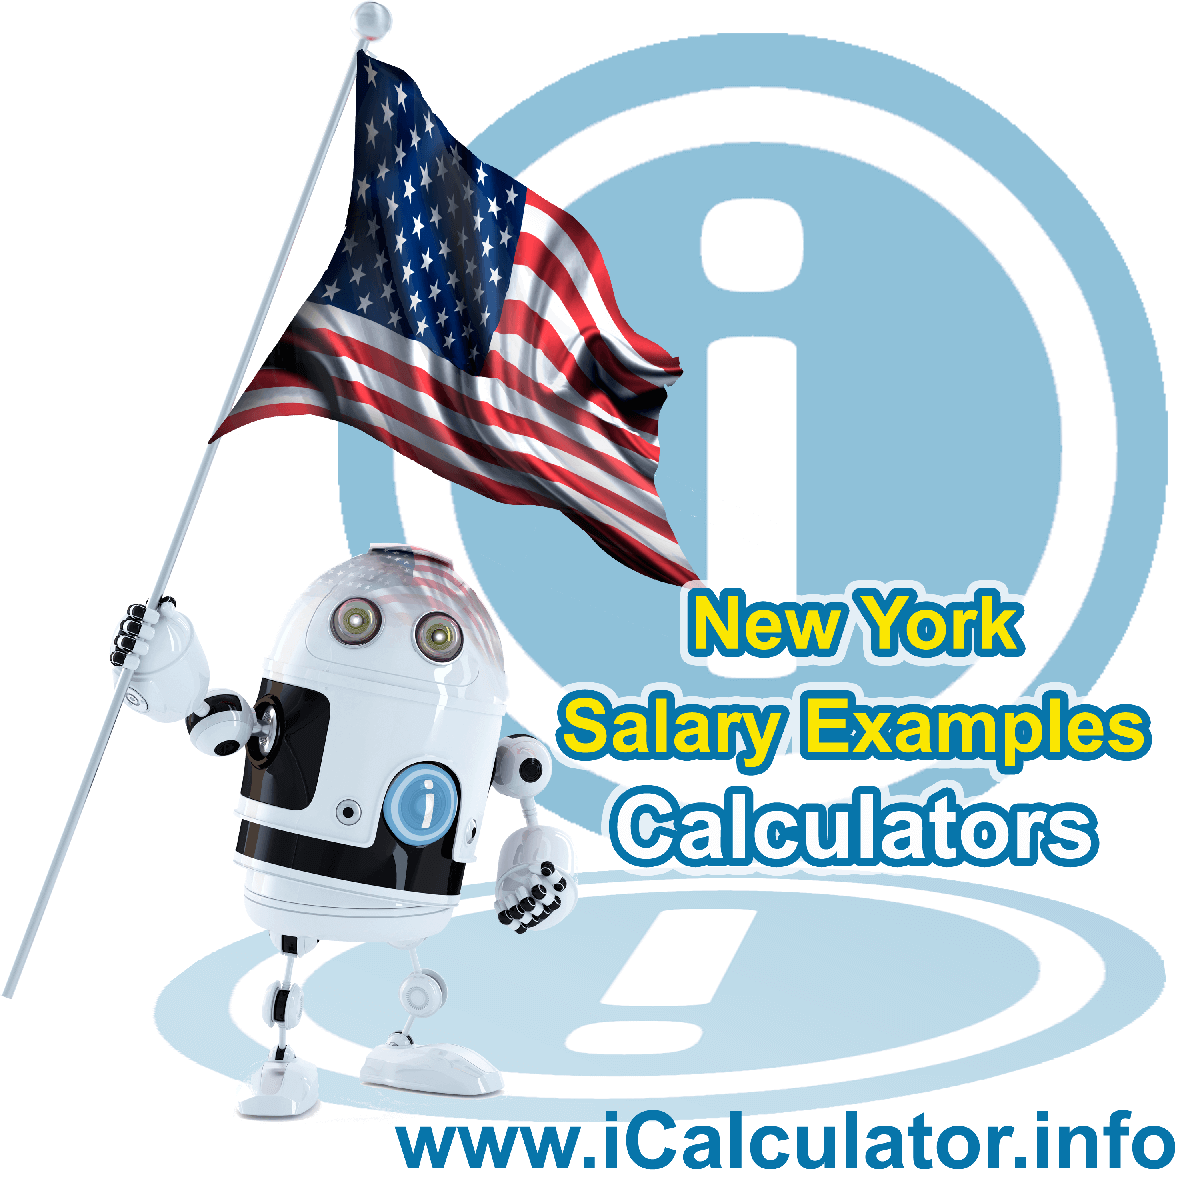 $ 200,000.00 After Tax in New York| iCalculator™ | $ 200,000.00 salary after tax example for 2023 tax year in New York. Federal and New York State income tax plus social security deductions and personal tax exemptions and tax allowances for 2023 